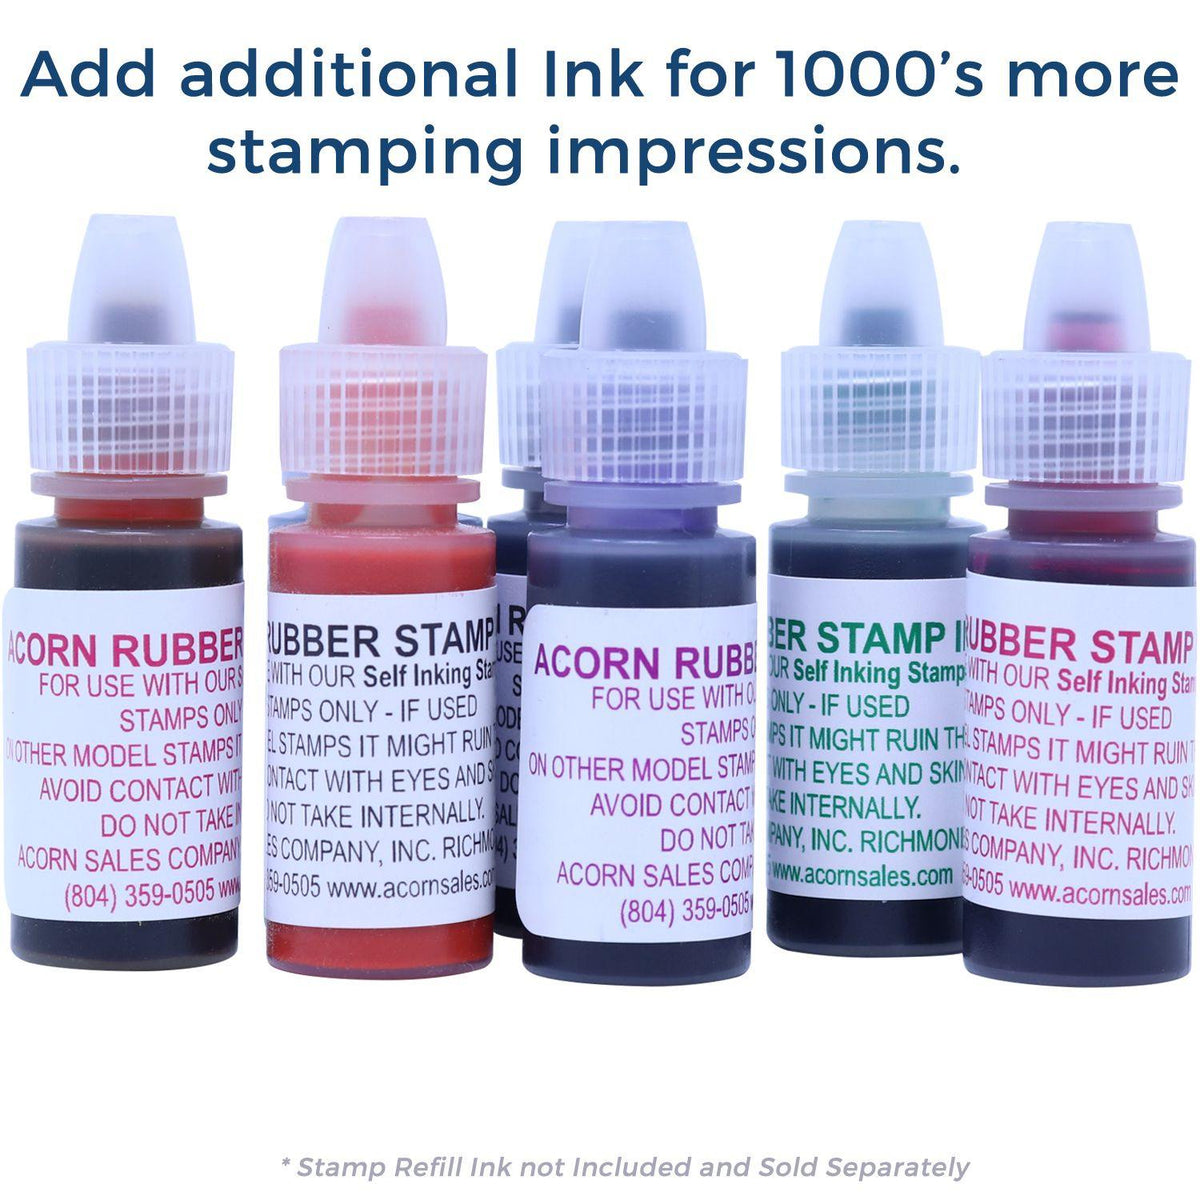 Refill Inks for Large Pre-Inked Script Rewrite in Cursive Stamp Available